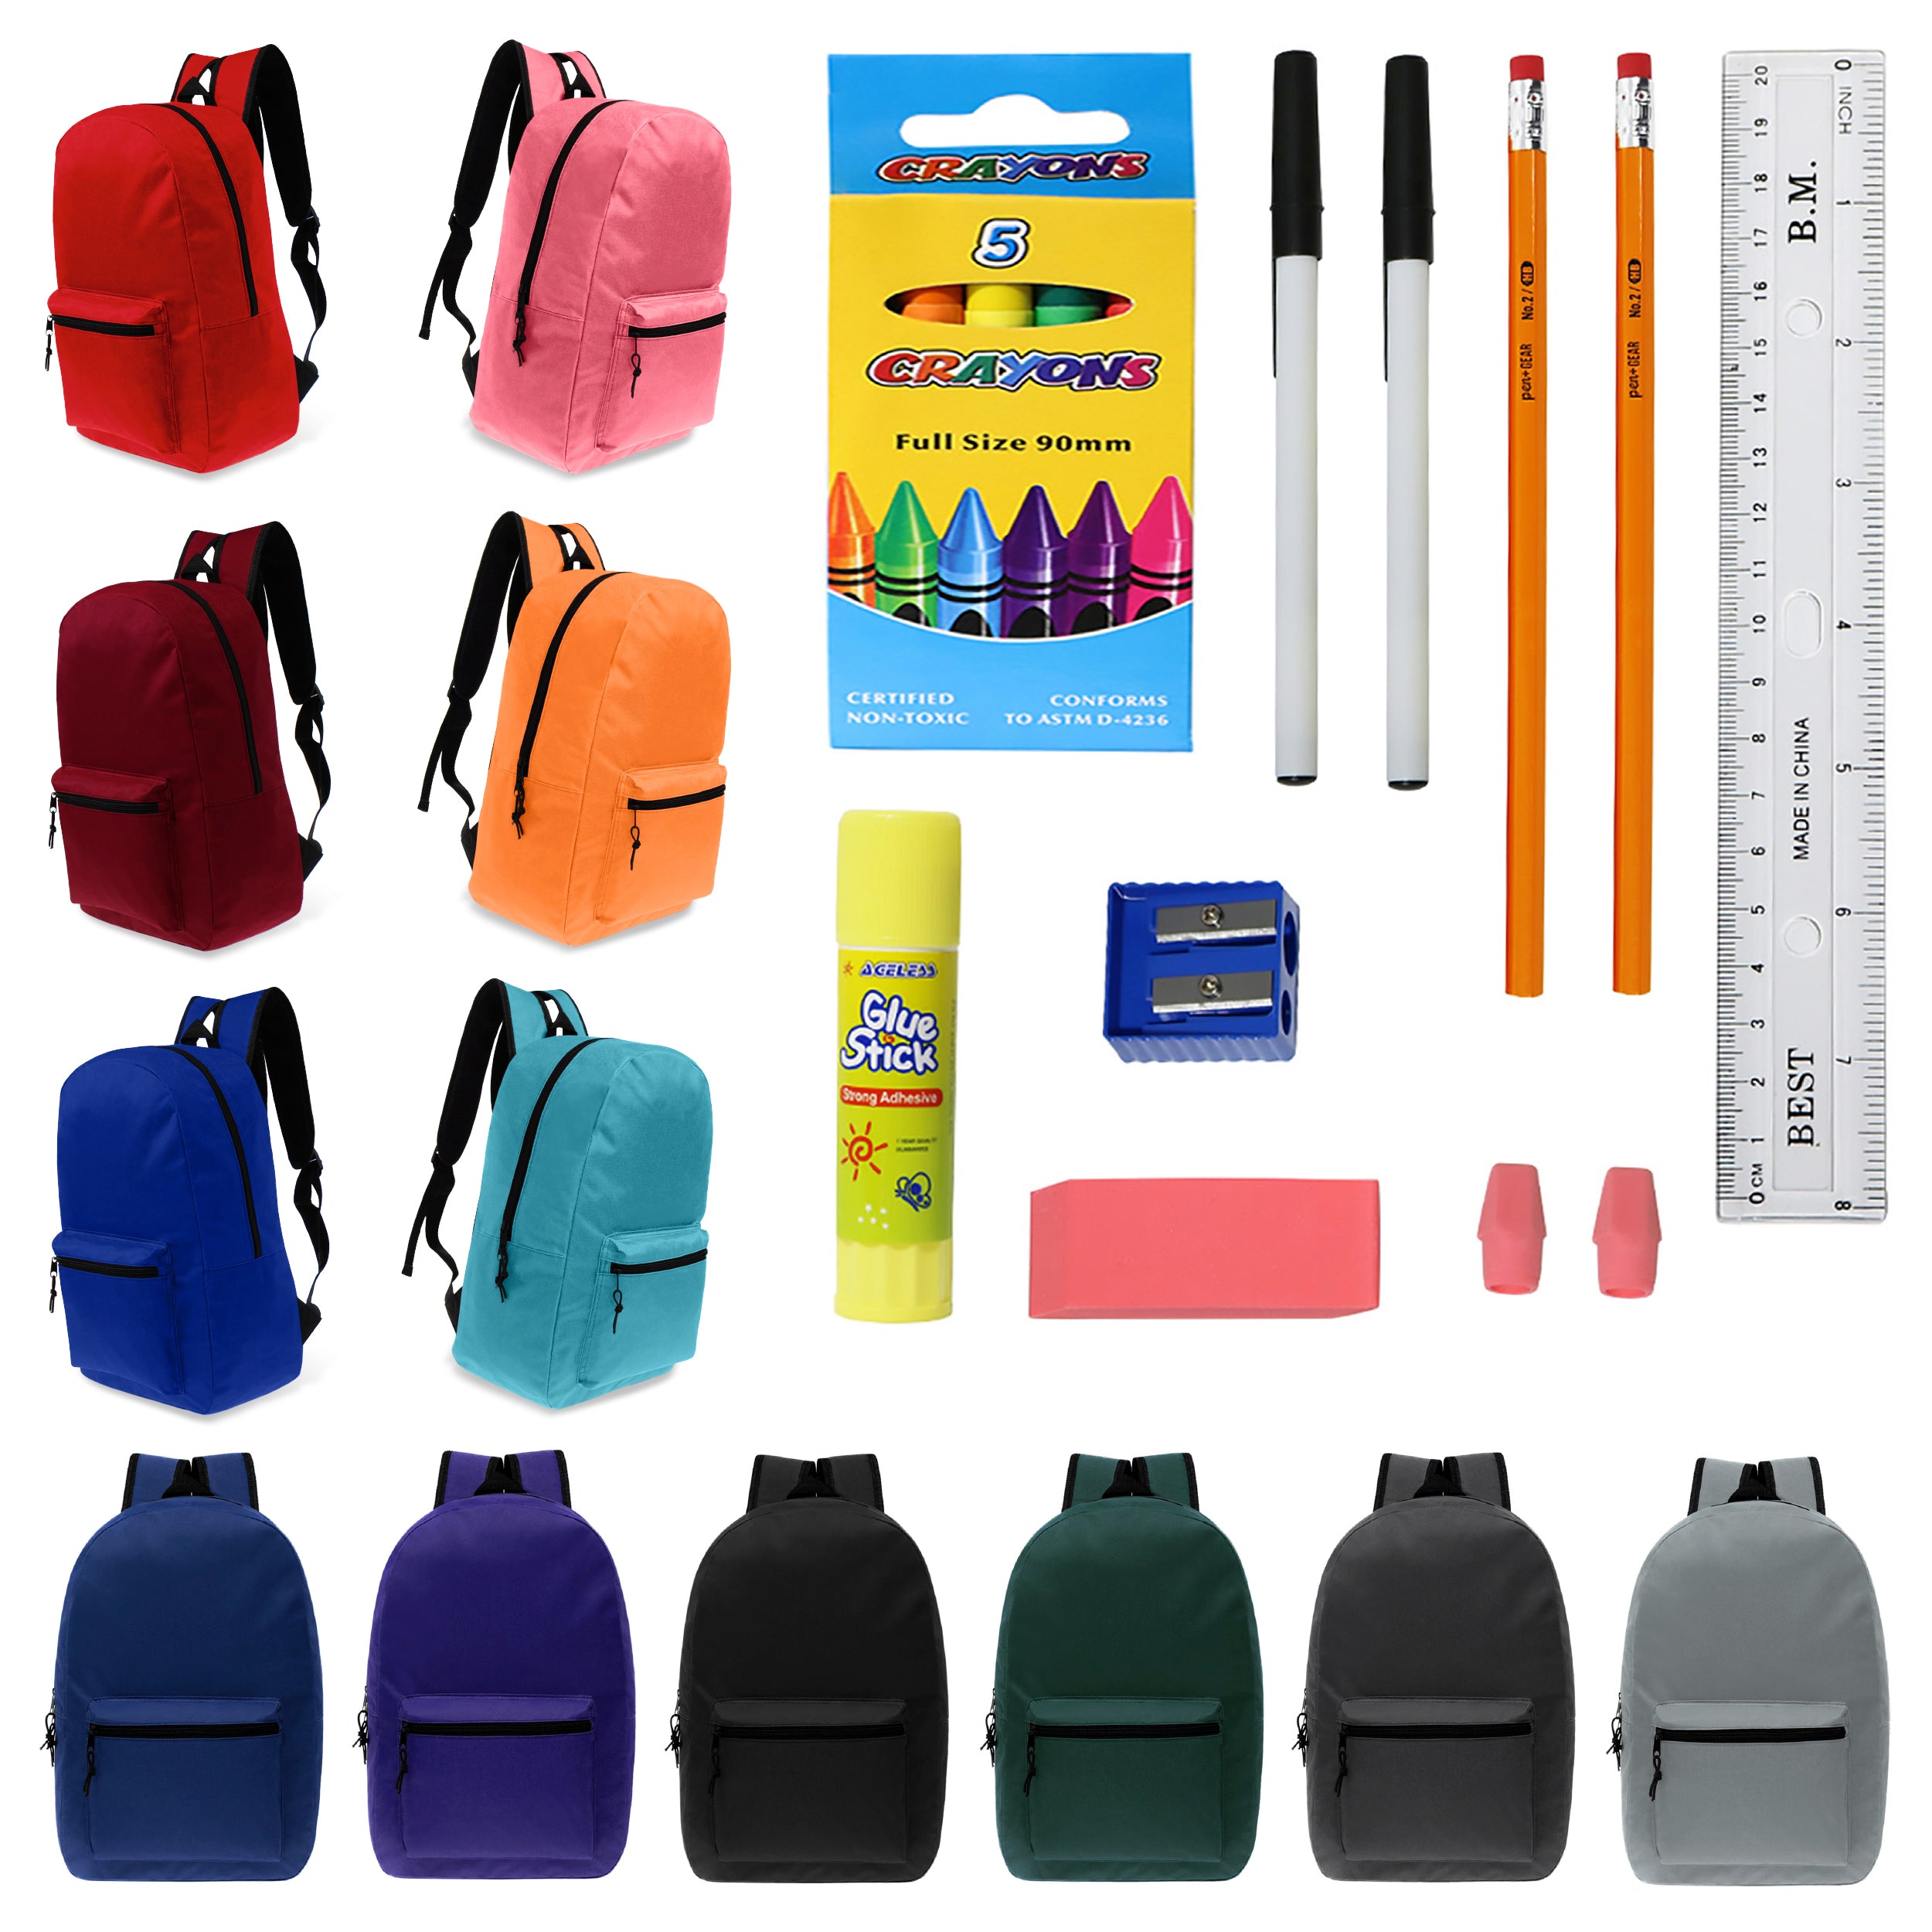 17 inches School Backpacks for Kids In Assorted Colors Bulk School Supplies Kit Case Of 12